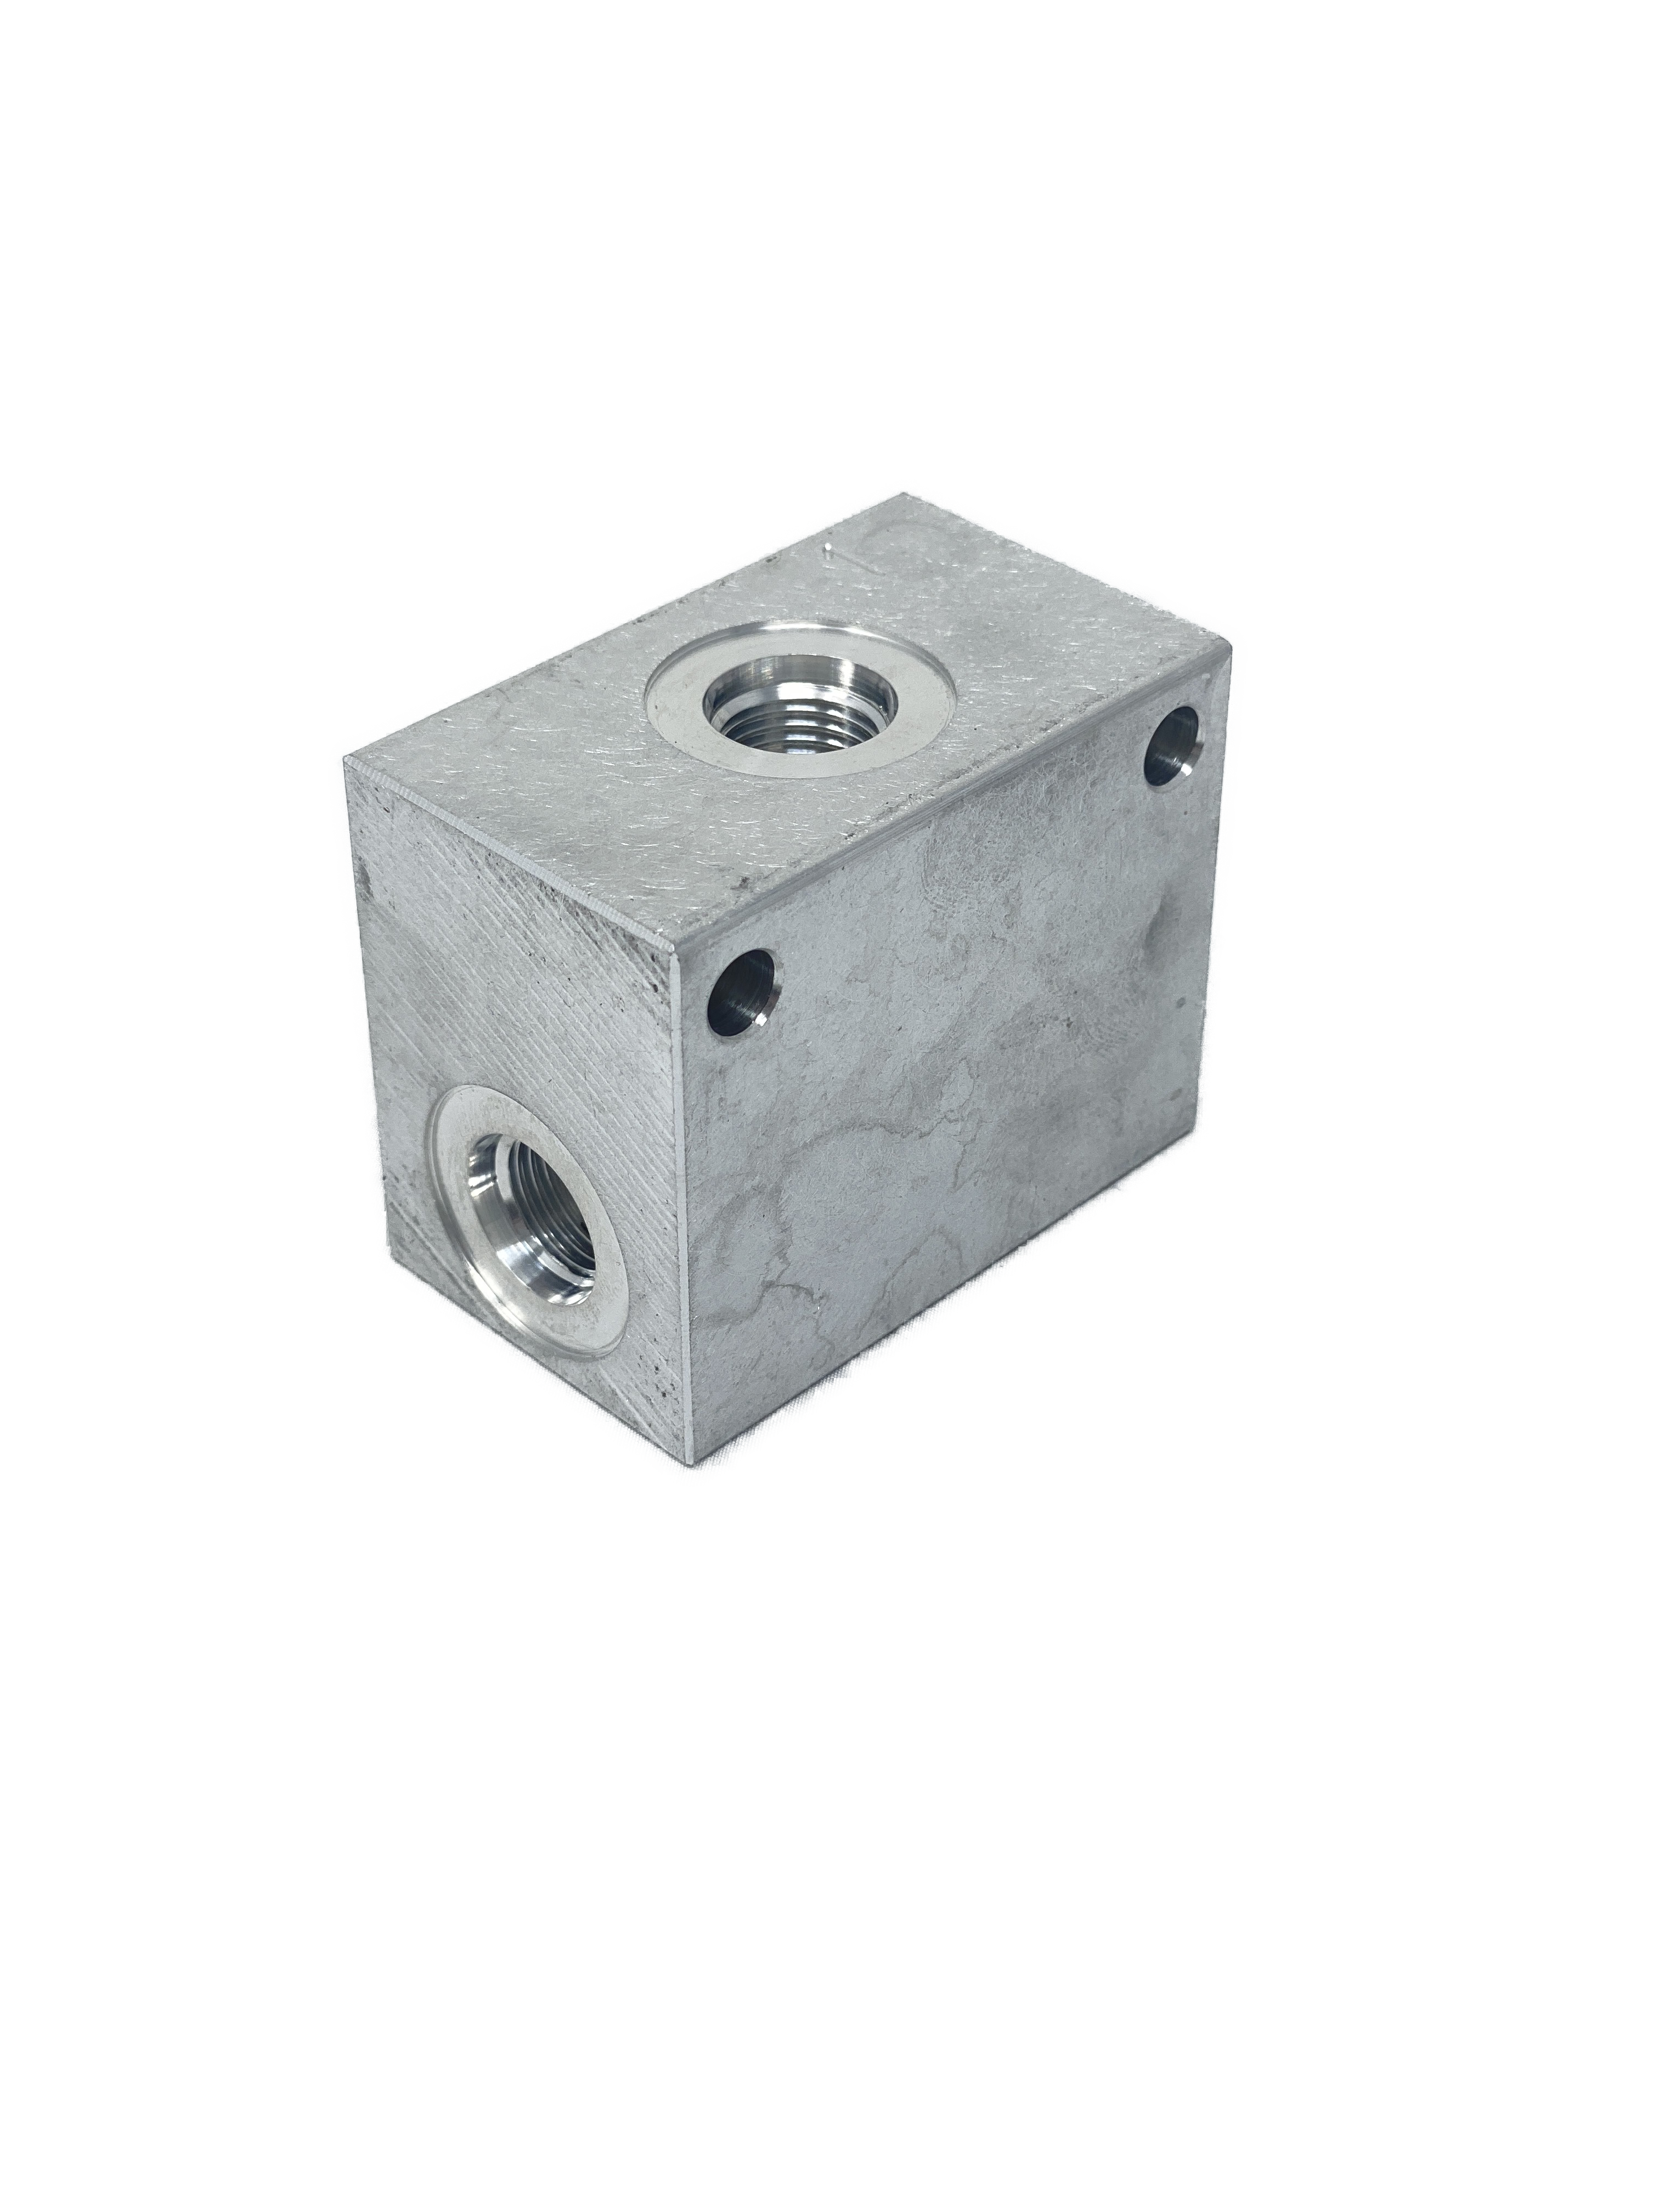 DC162CB12S : Daman Common Cavity Body, C-16-2 Cartridge Cavity, #12 SAE (3/4") Port Connections, 5000psi Rated, Ductile Iron, Without Gauge Port